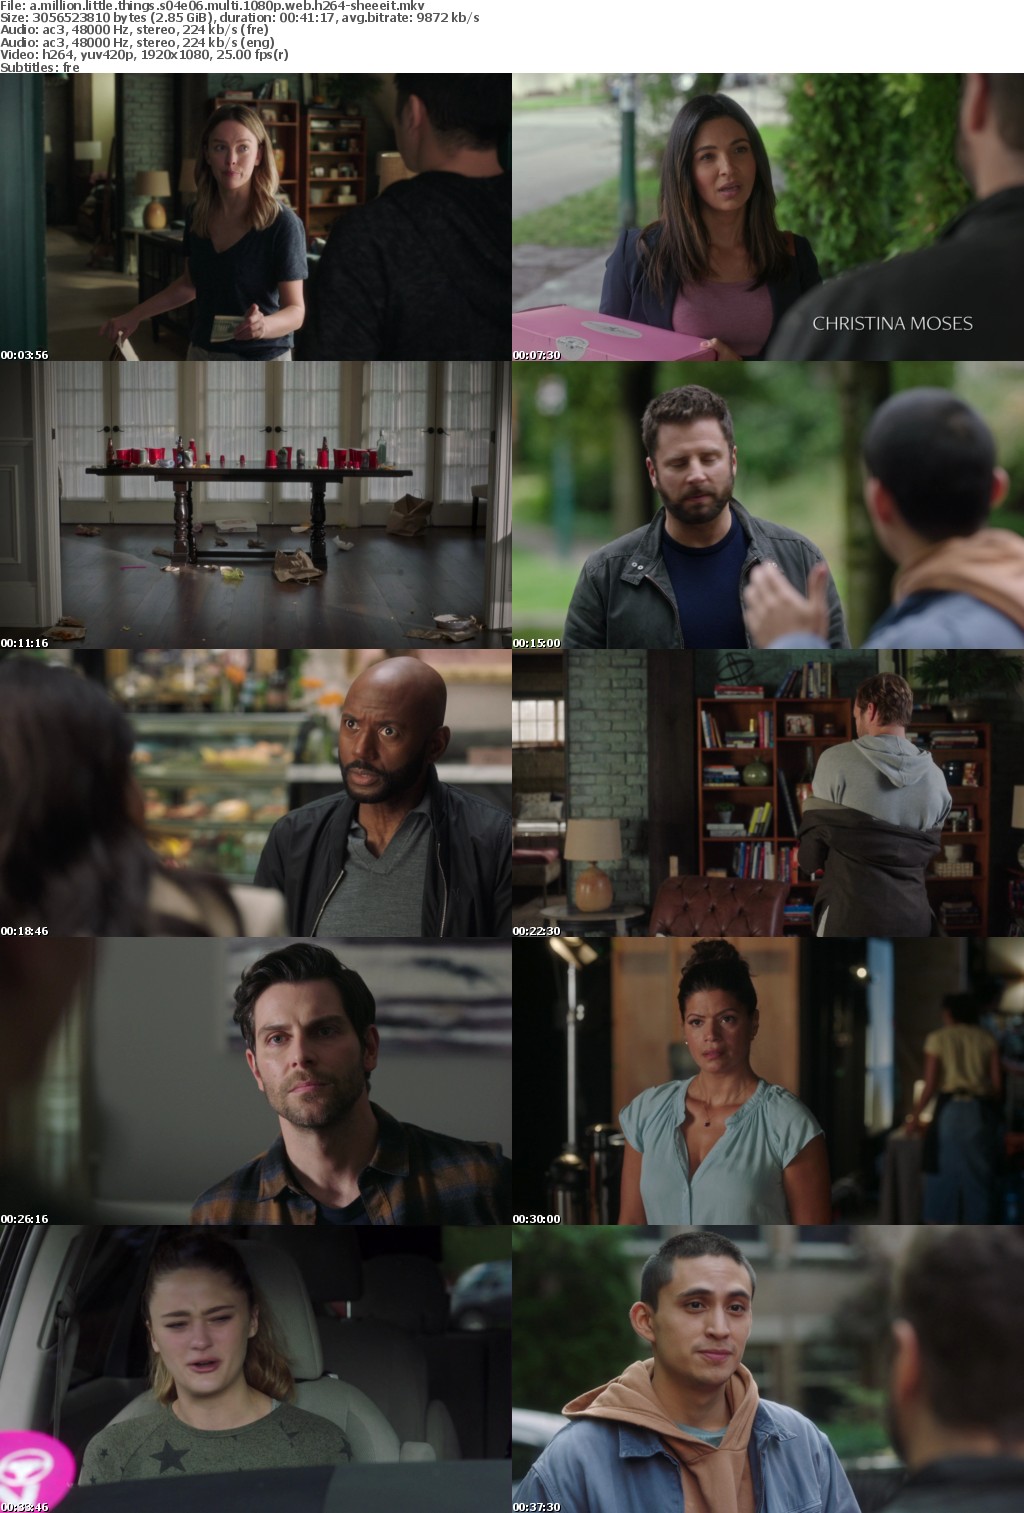 A Million Little Things S04E06 MULTi 1080p WEB H264-SHEEEIT